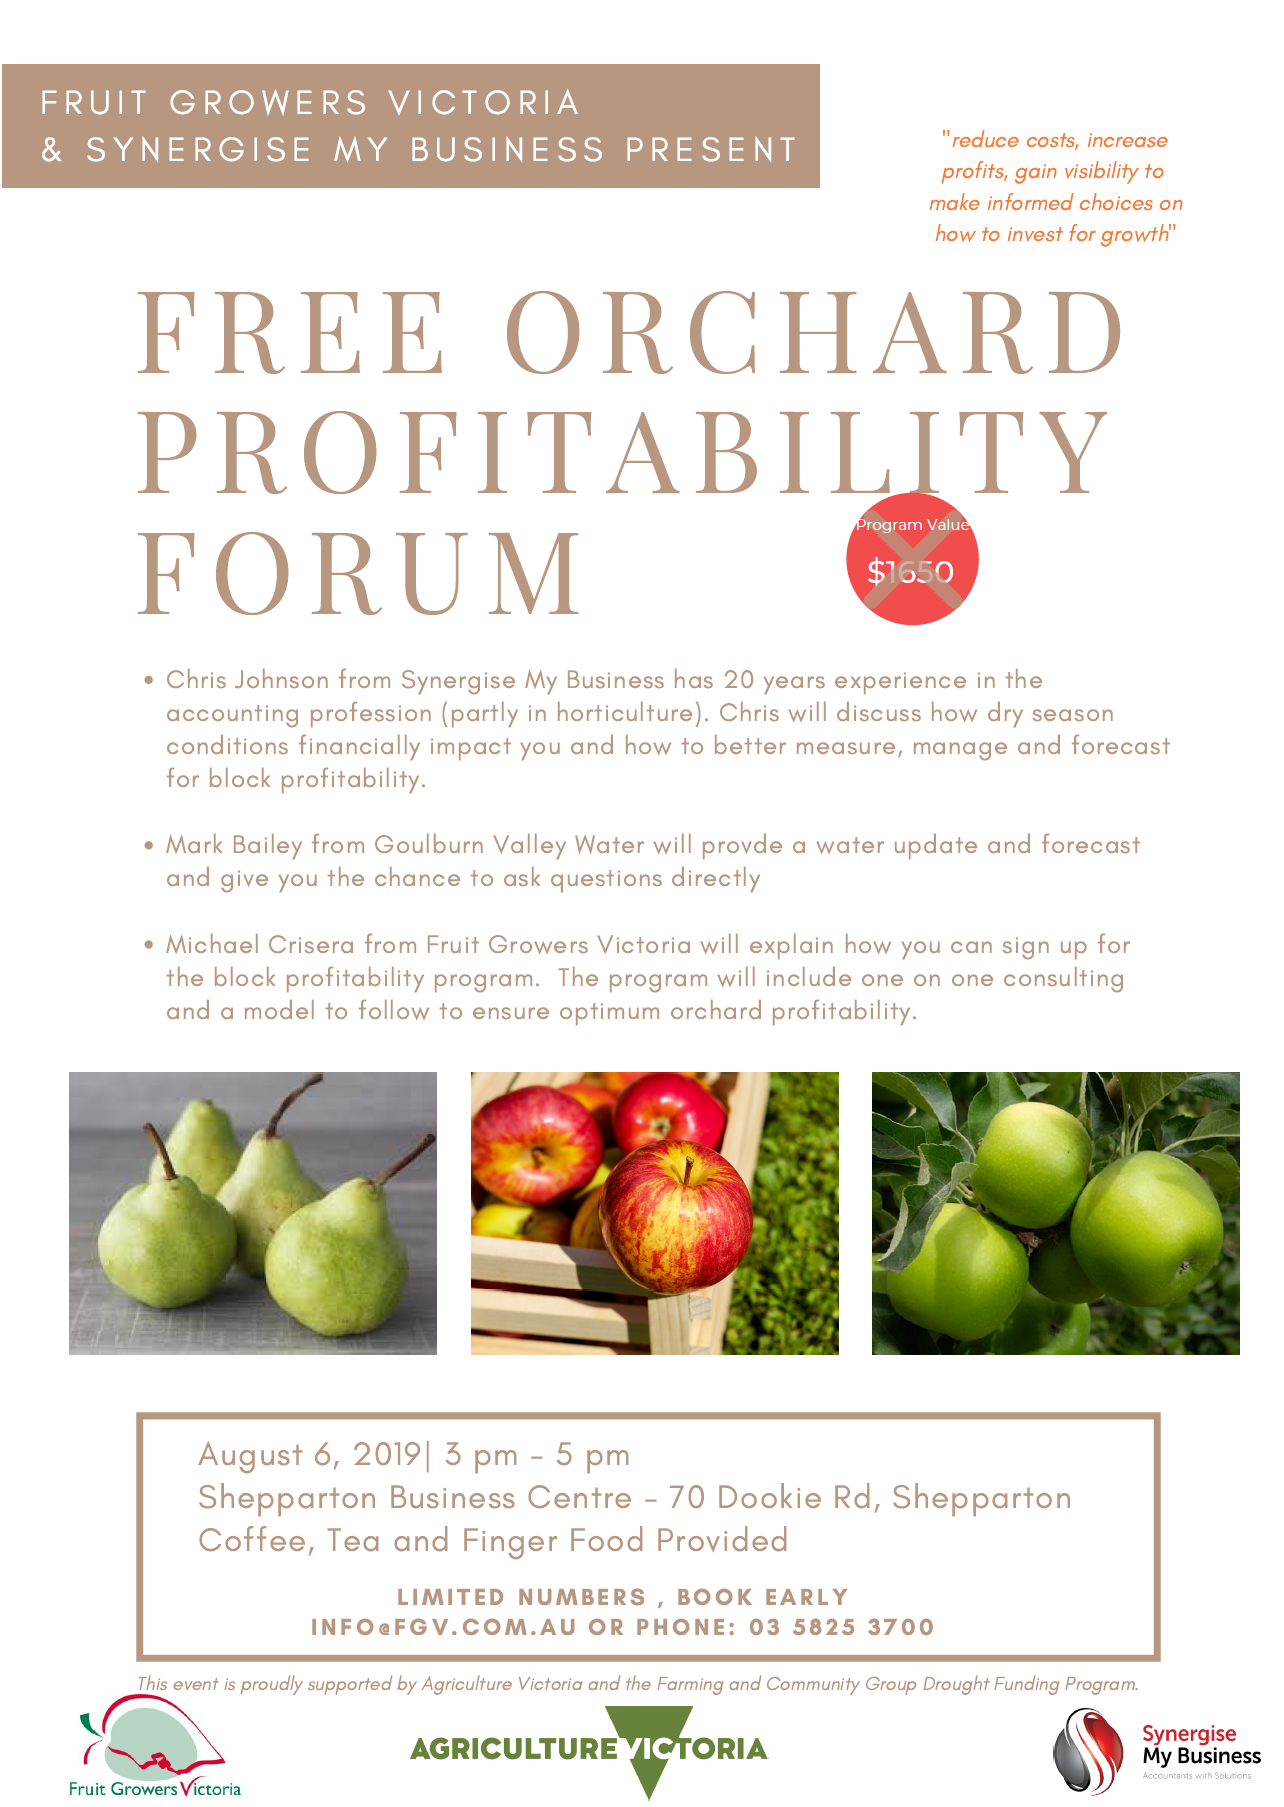 Orchard Profitability Forum- Tuesday 6 August 2019 from 3:00pm-5:00pm, Shepparton Business Centre- 70 Dookie Road, Shepparton 